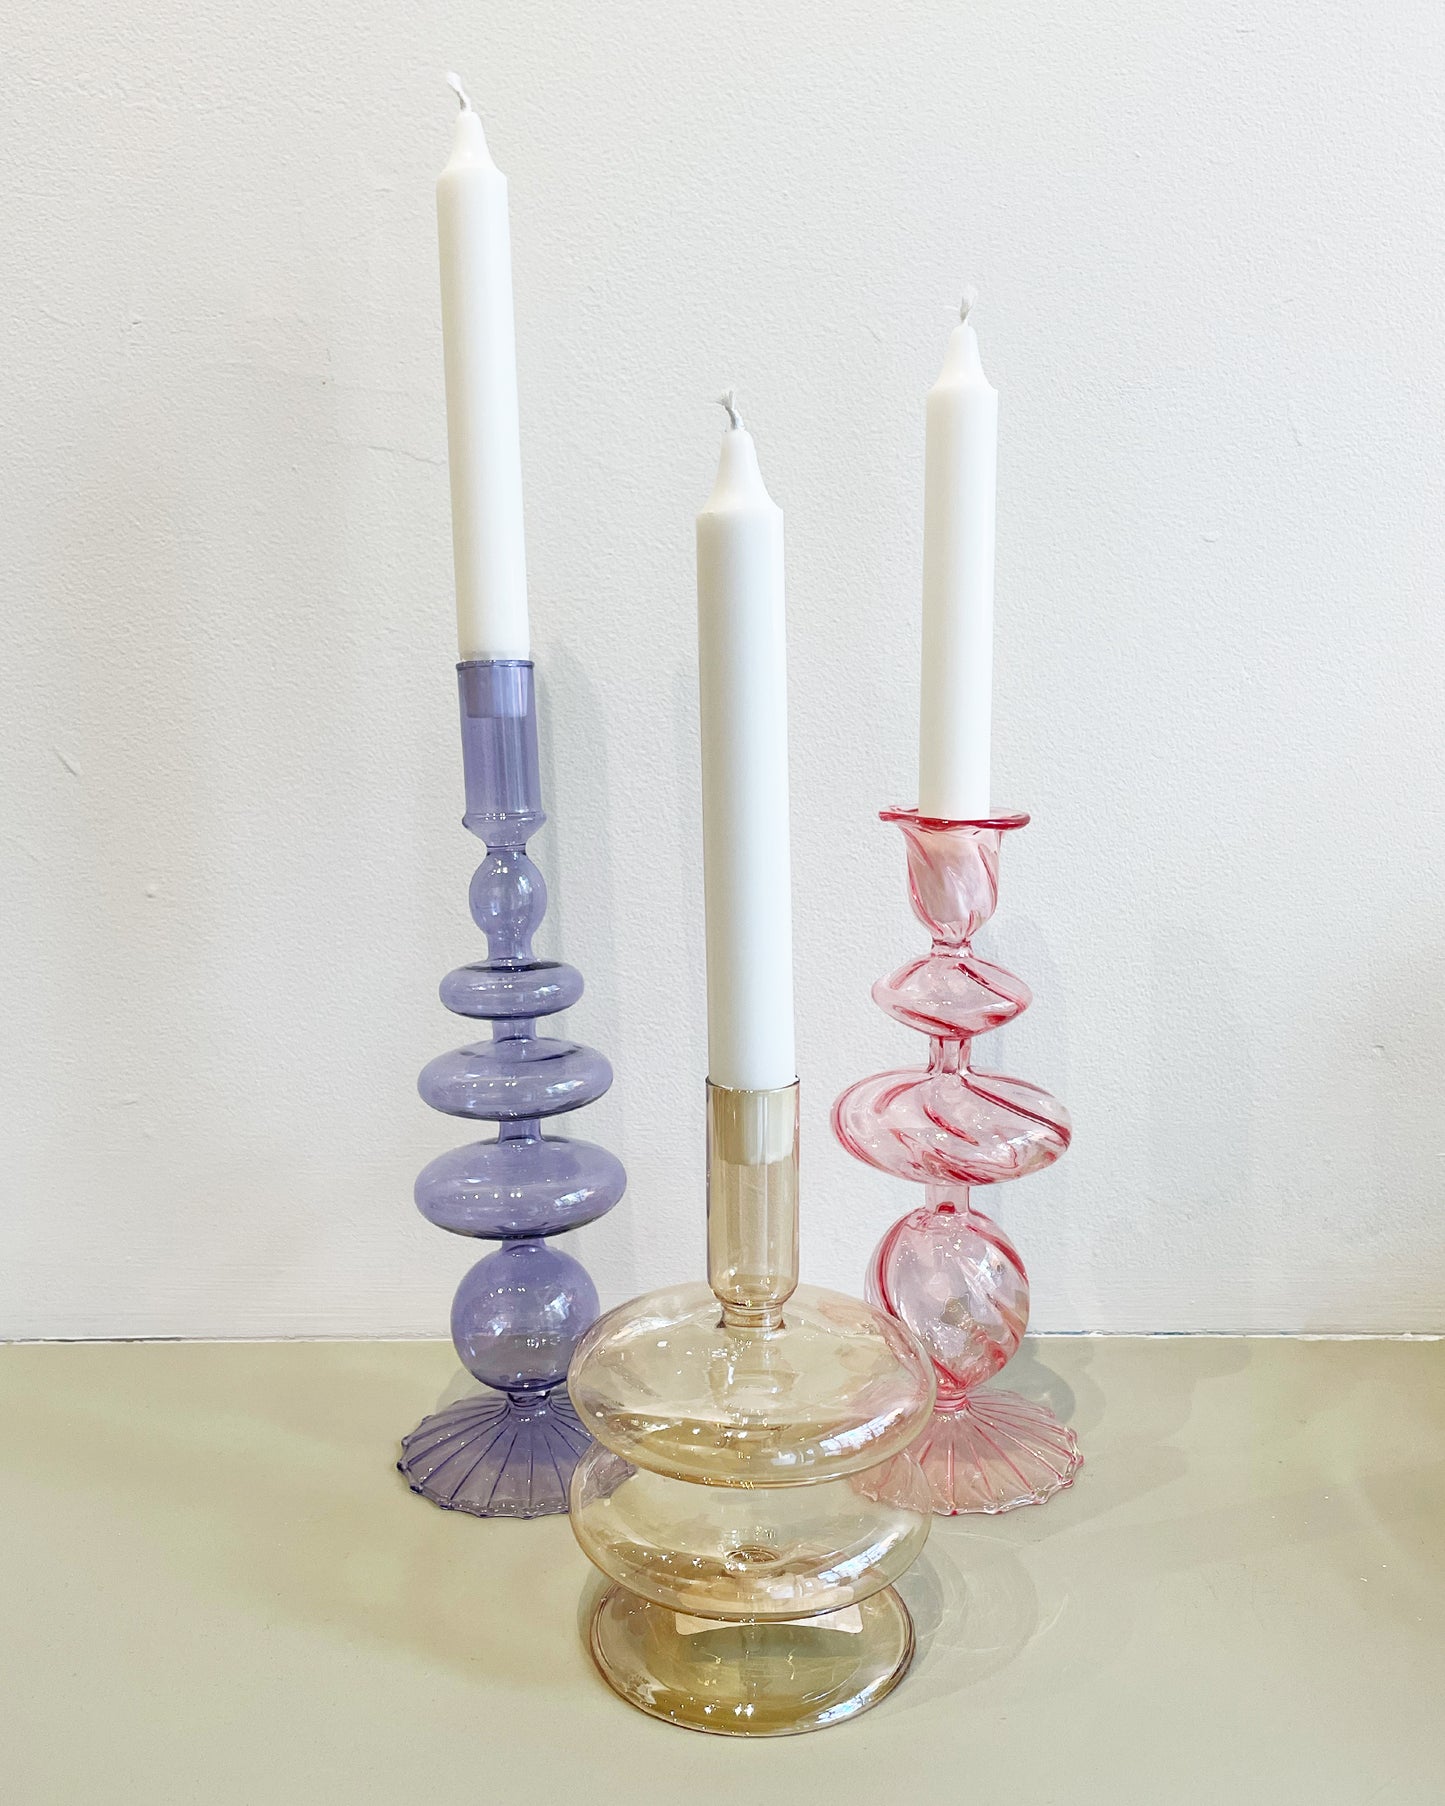 9 CHRISTOPHER Finn Glass Candlestick in Iris available at Lahn.shop